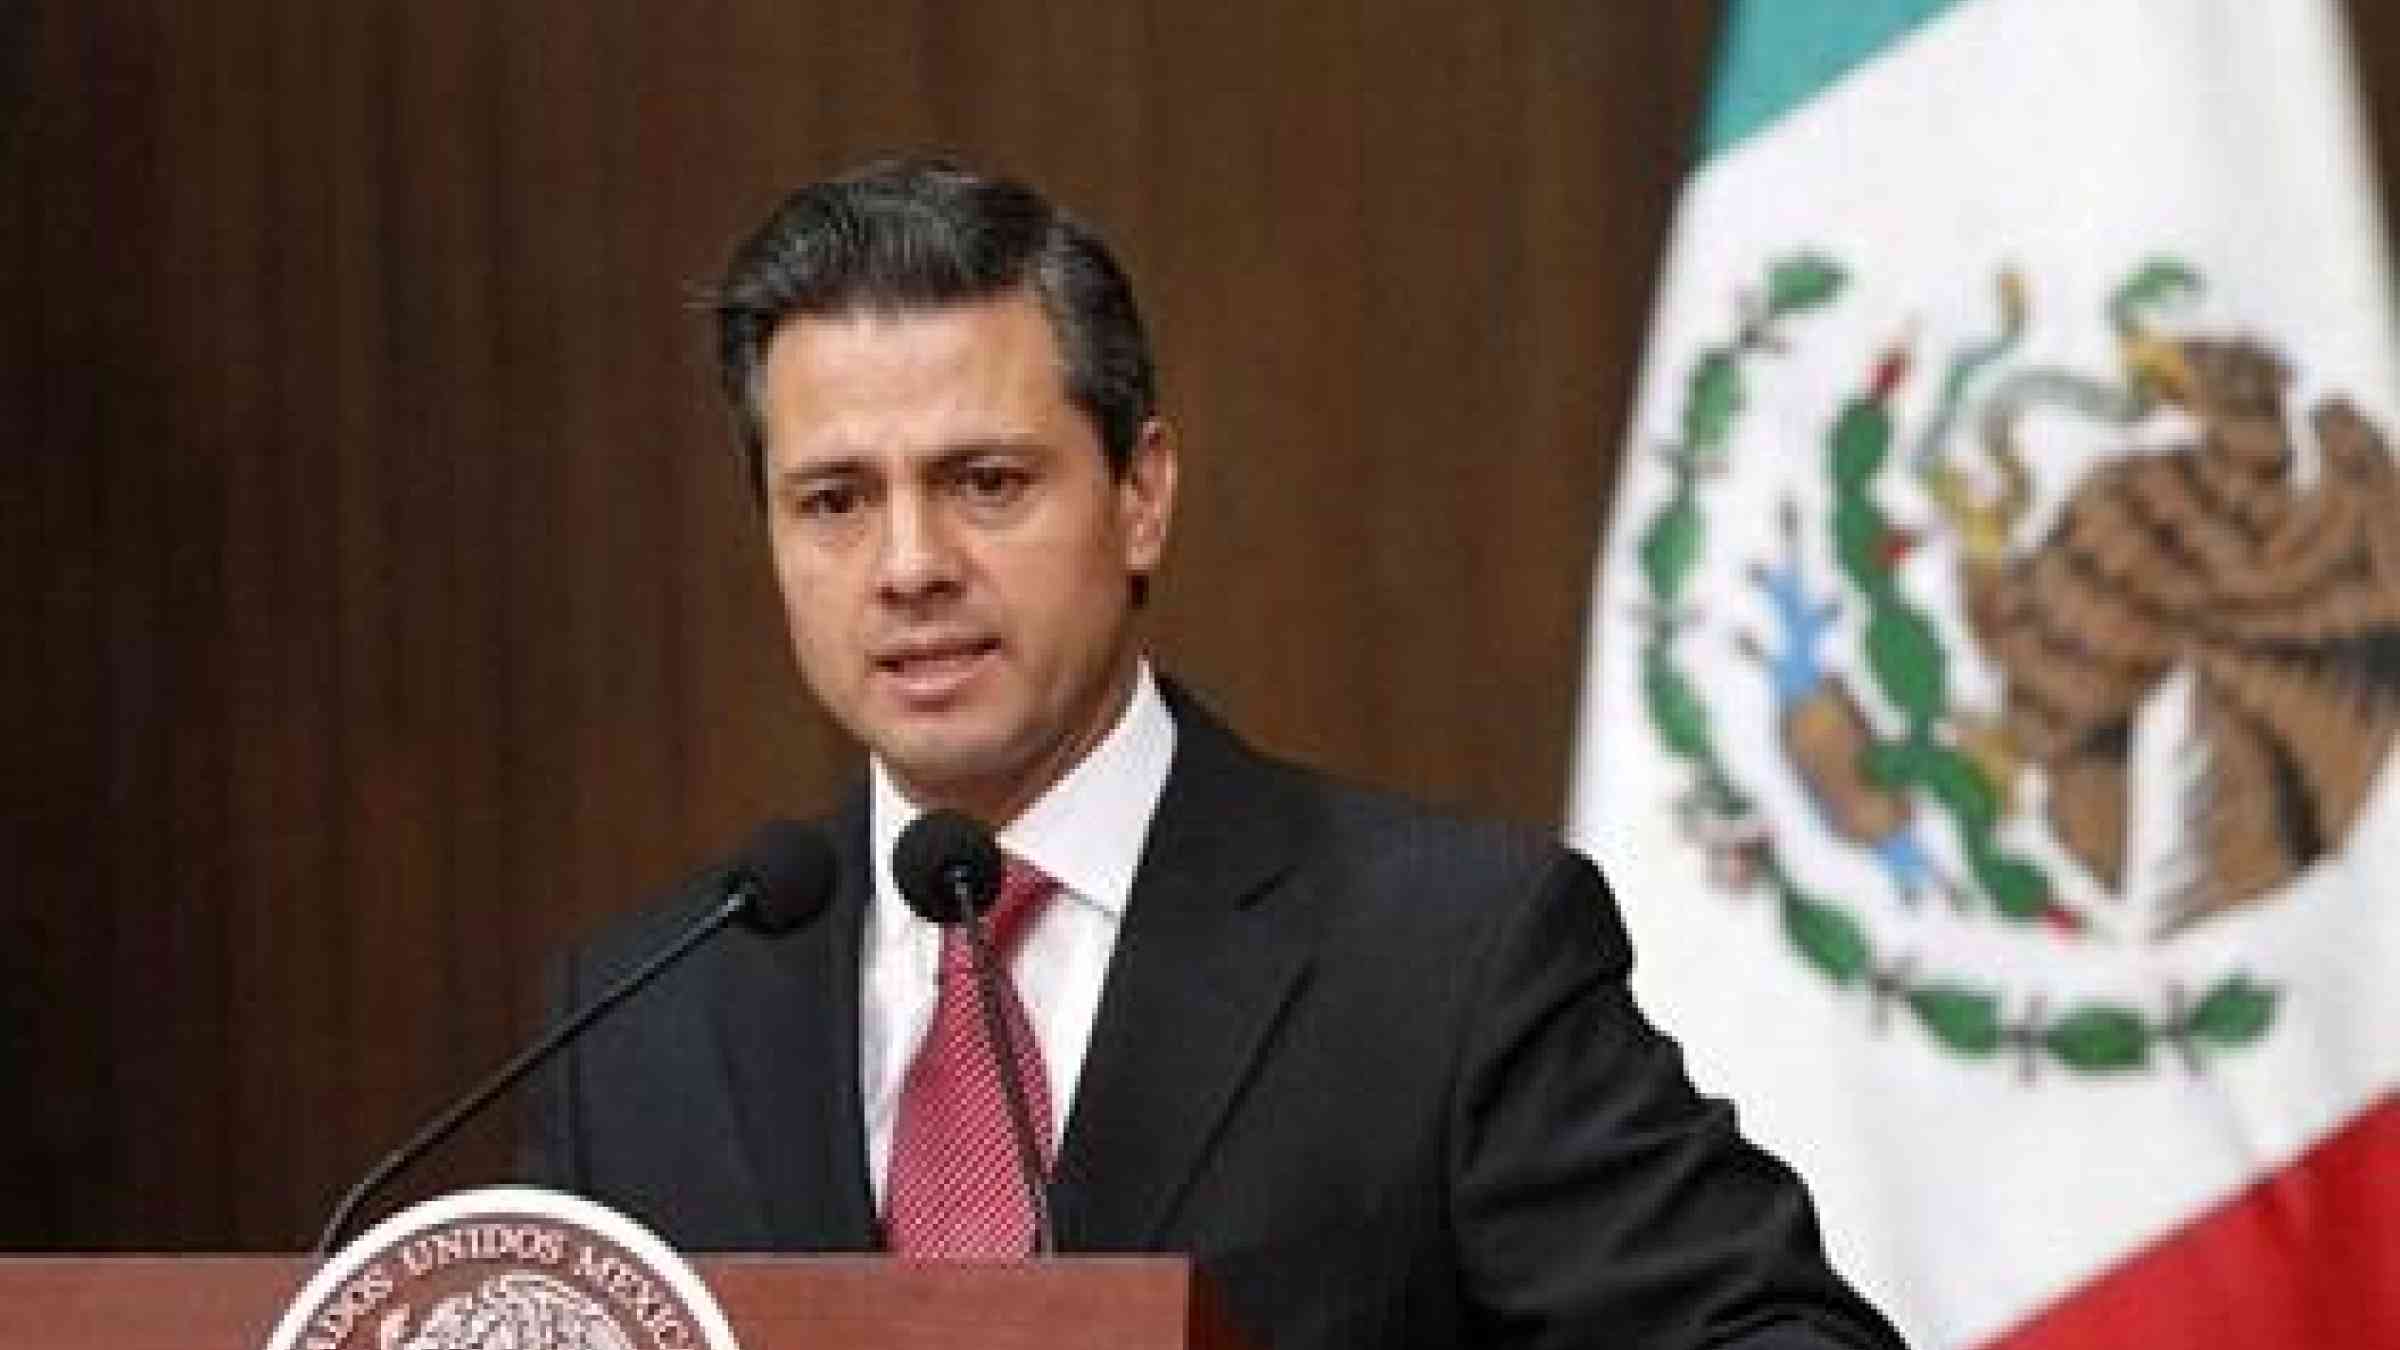 Mexican President Mr. Enrique Peña Nieto has reaffirmed his country’s commitment to implementing the Sendai Framework for Disaster Risk Reduction, a global plan to reduce disaster losses adopted last year.